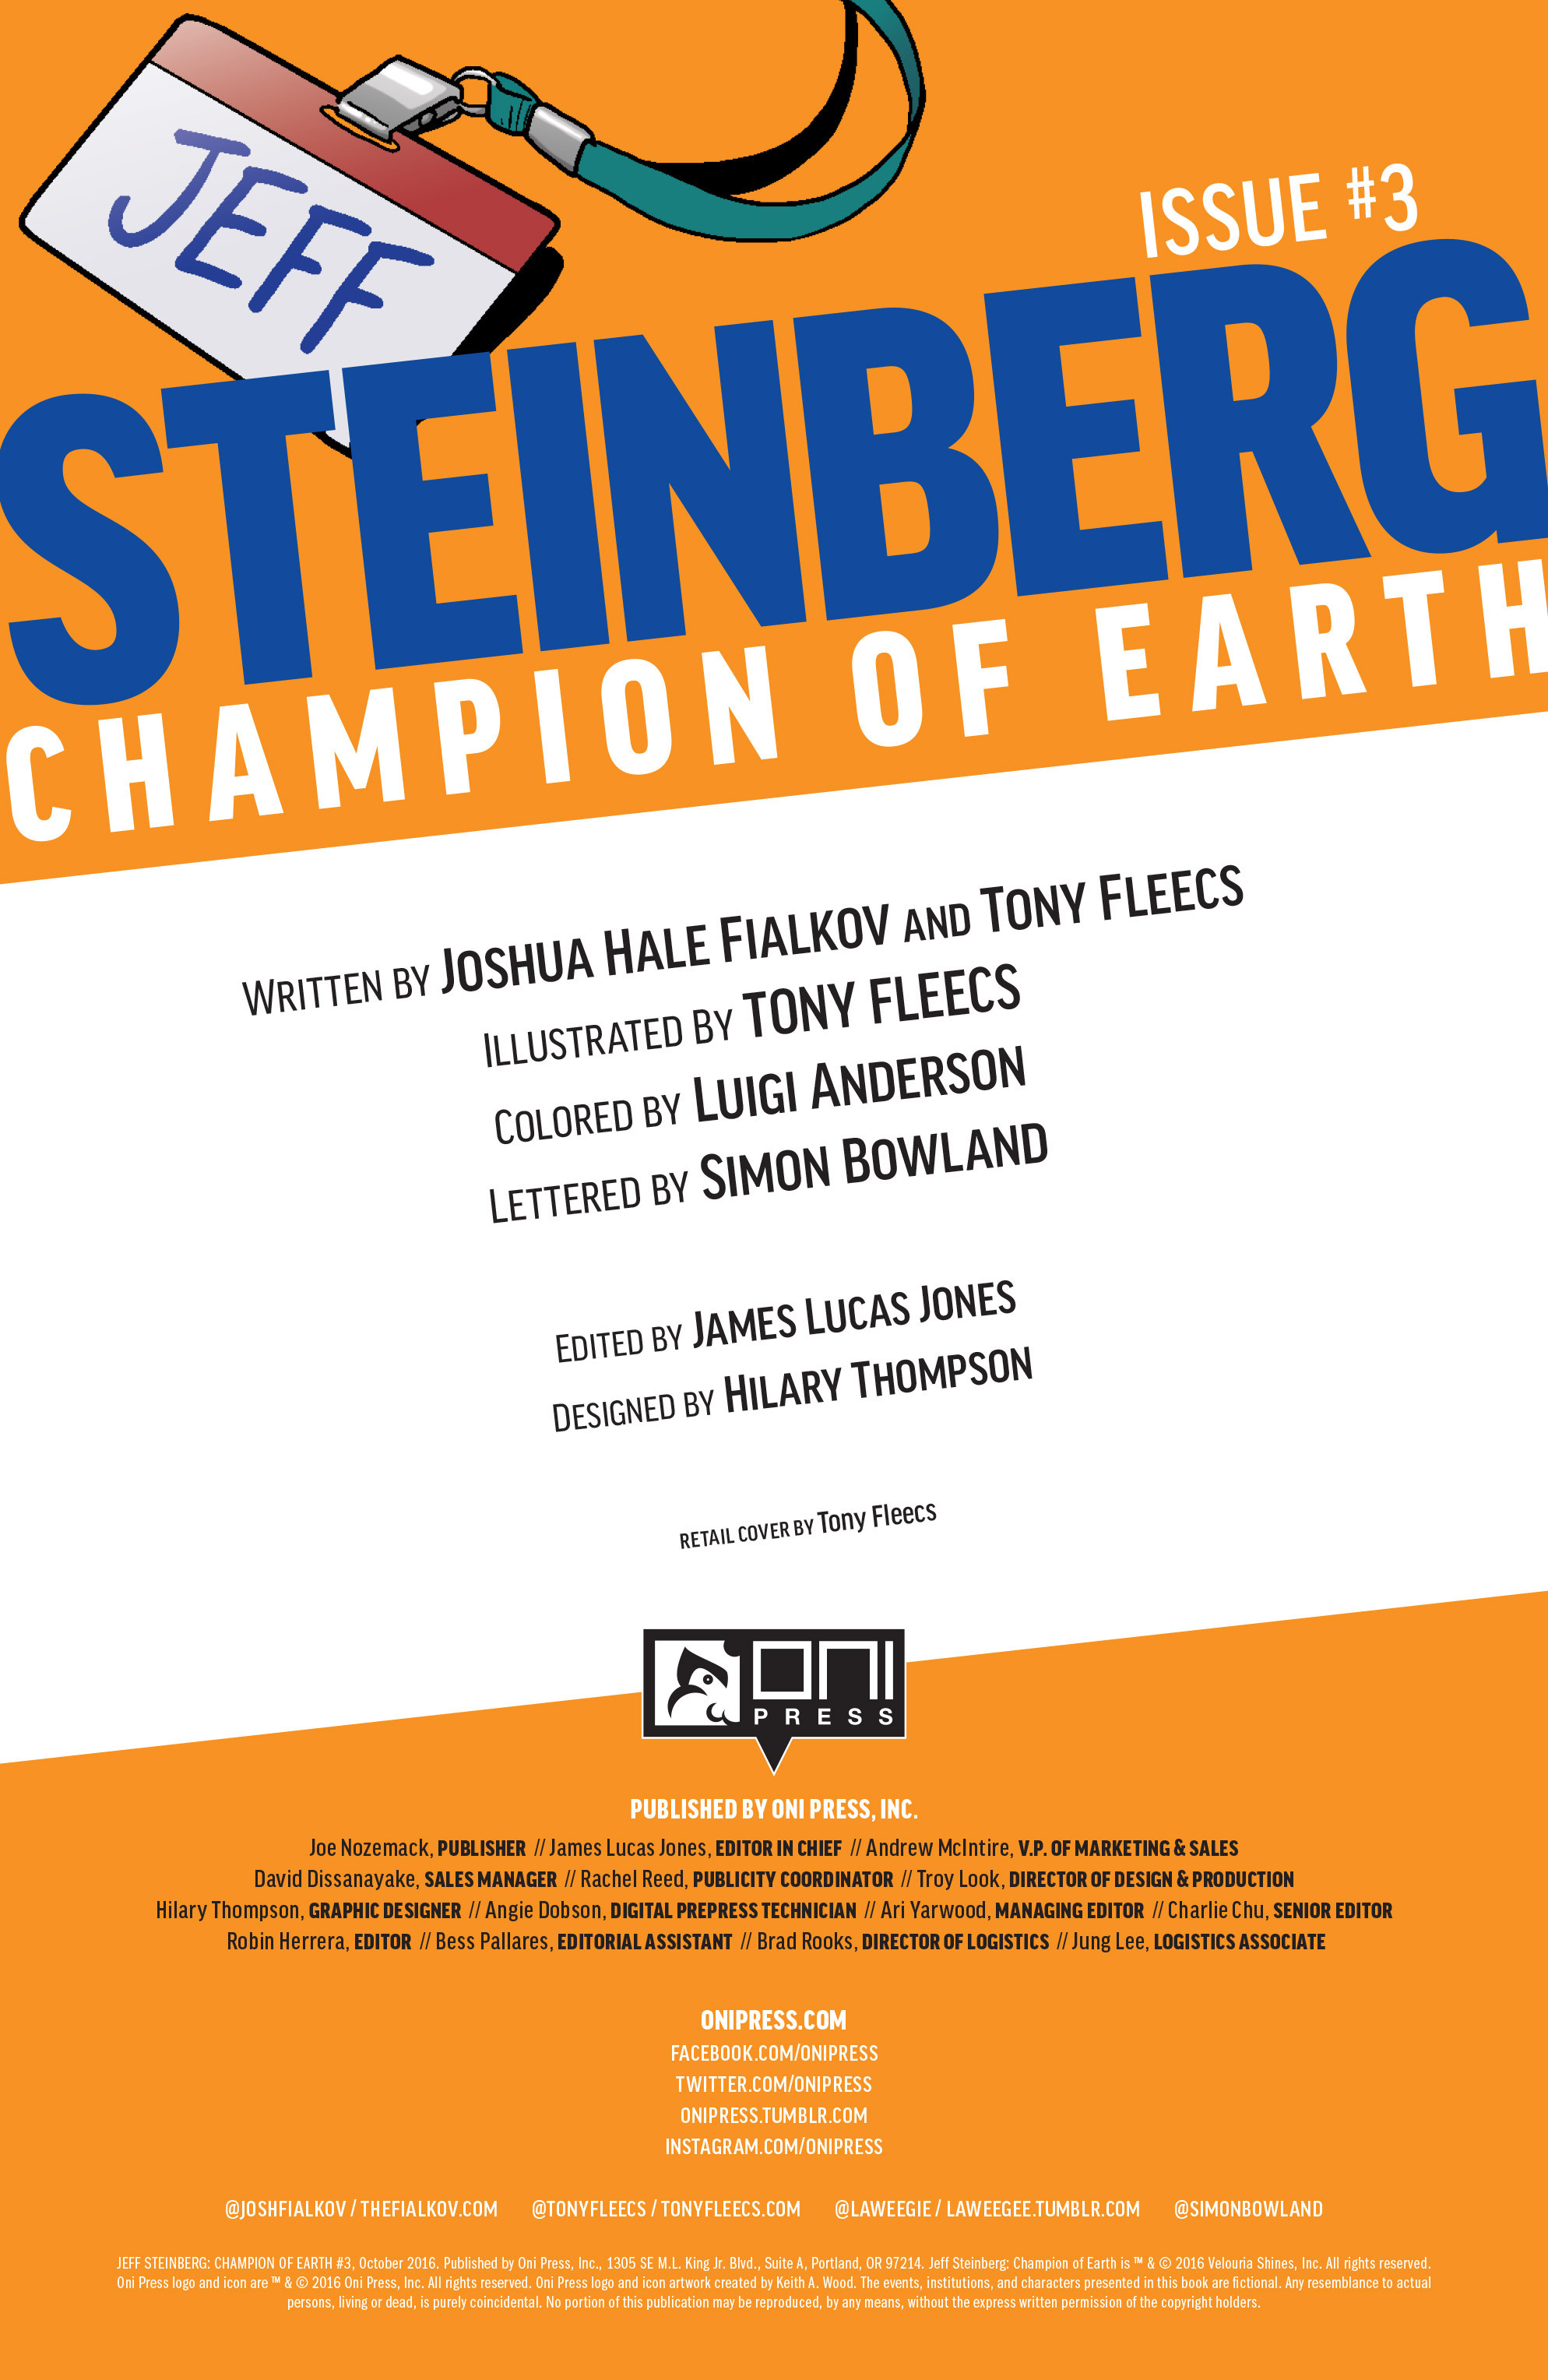 Read online Jeff Steinberg Champion of Earth comic -  Issue #3 - 2